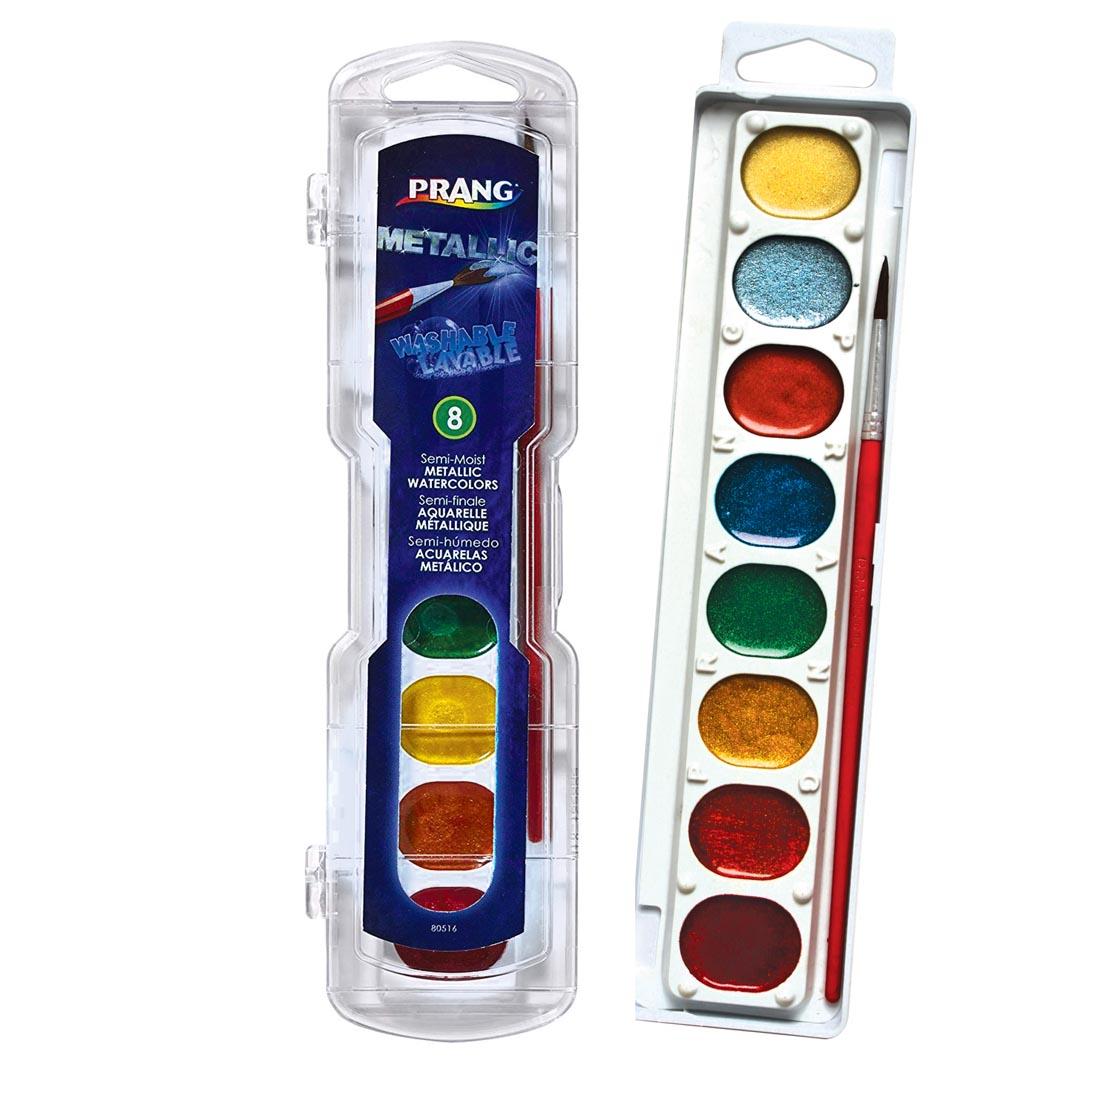 Prang Washable Watercolors Metallic Set Shown Both With Package Closed and Open with Brush